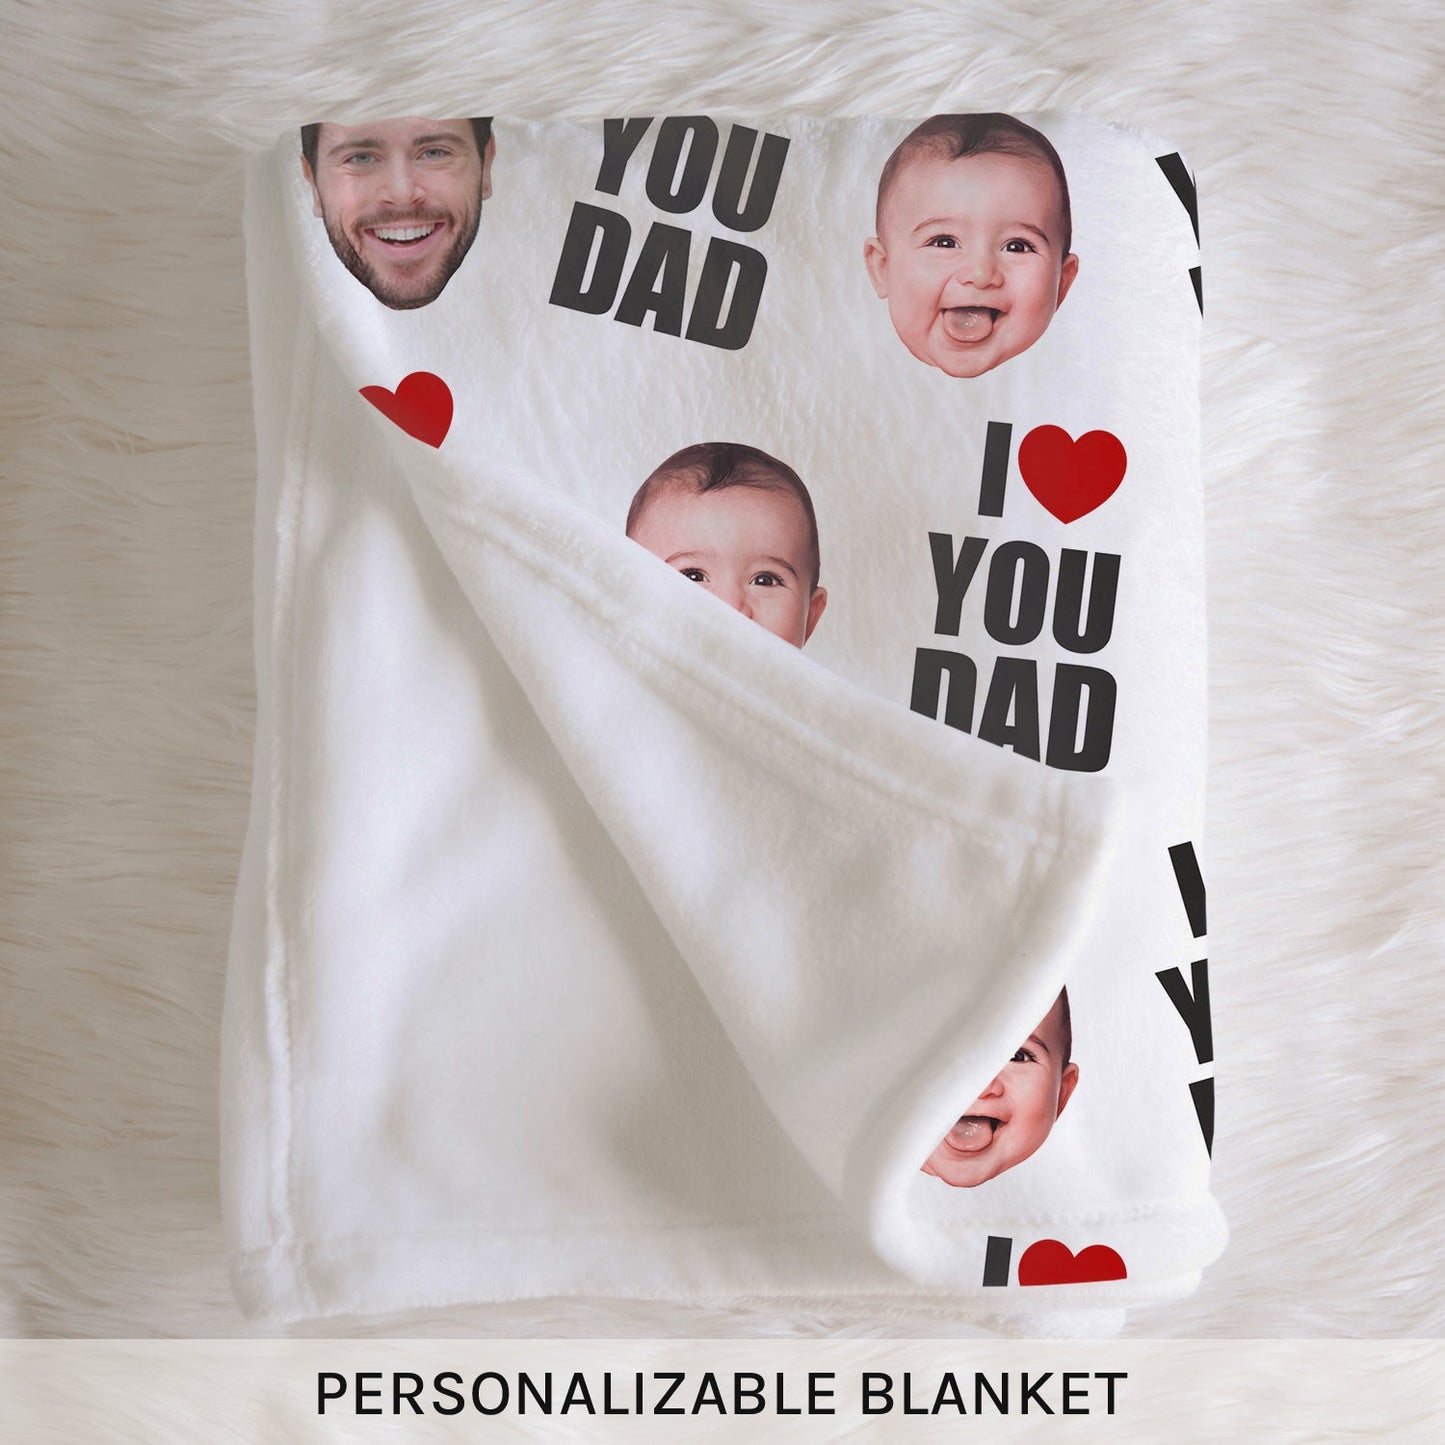 I love you daddy blanket - Personalized Father's Day or Birthday gift for Dad - Custom Blanket - MyMindfulGifts